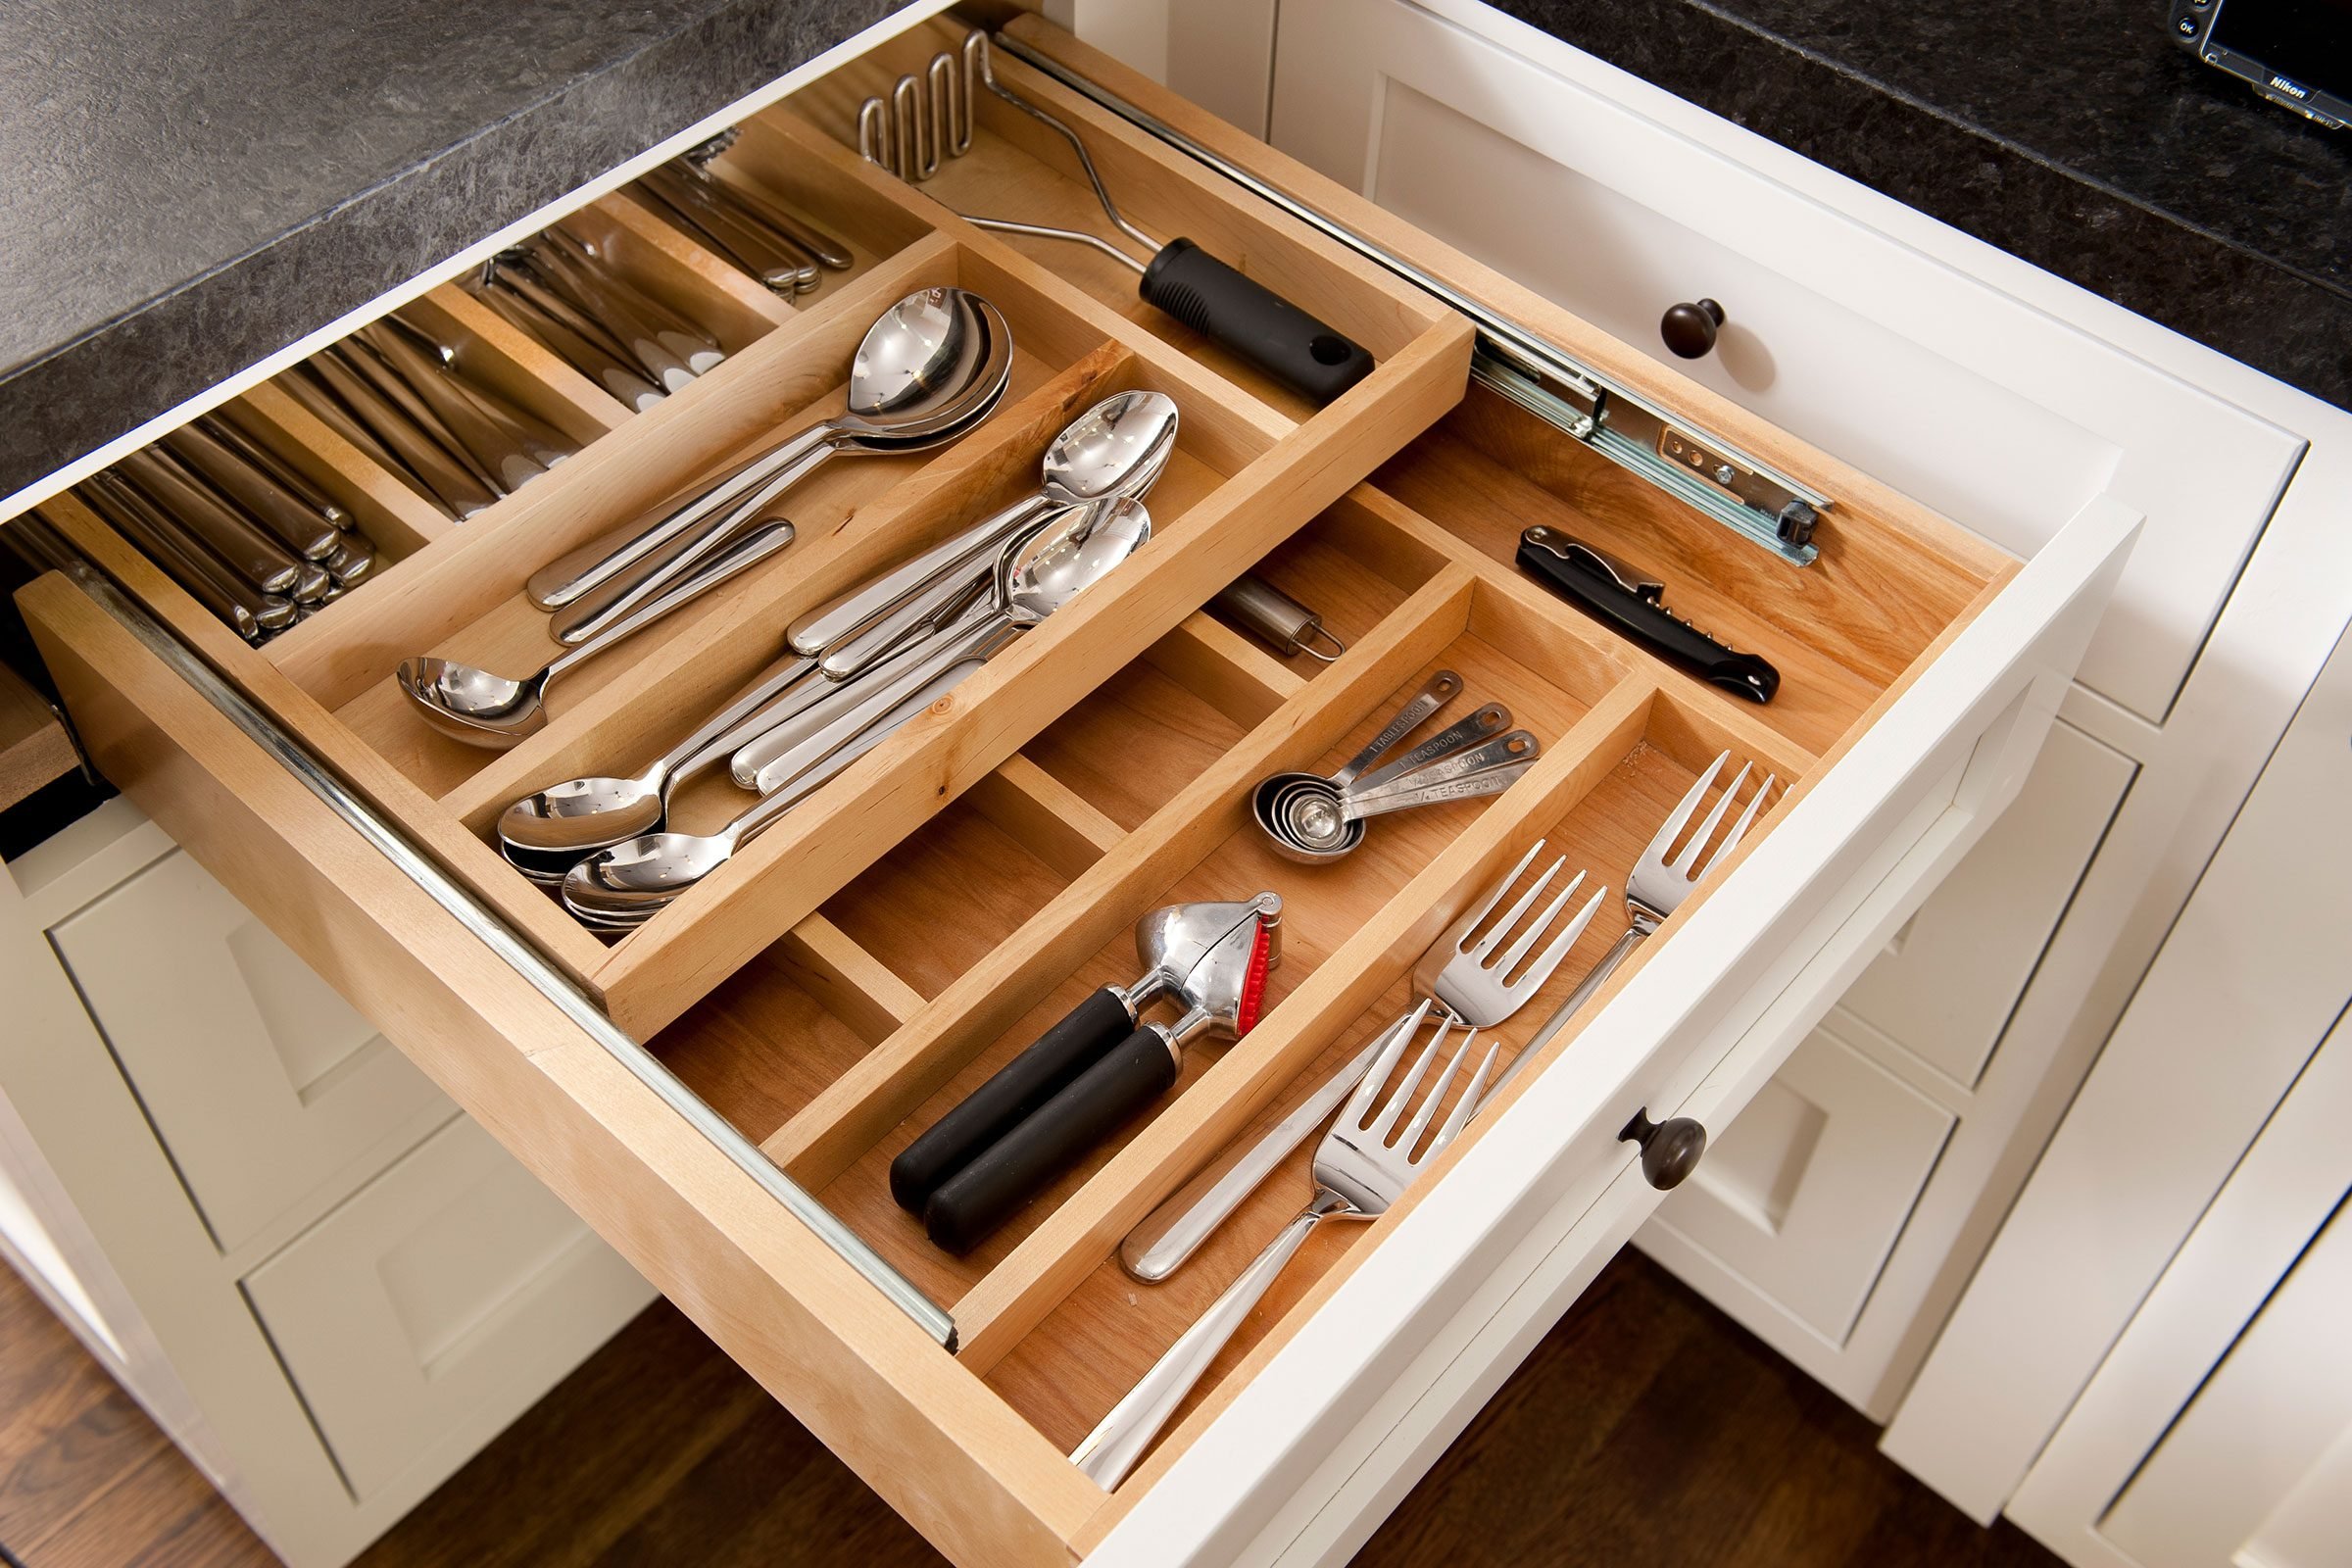 Kitchen Silverware Drawer with compartments inside